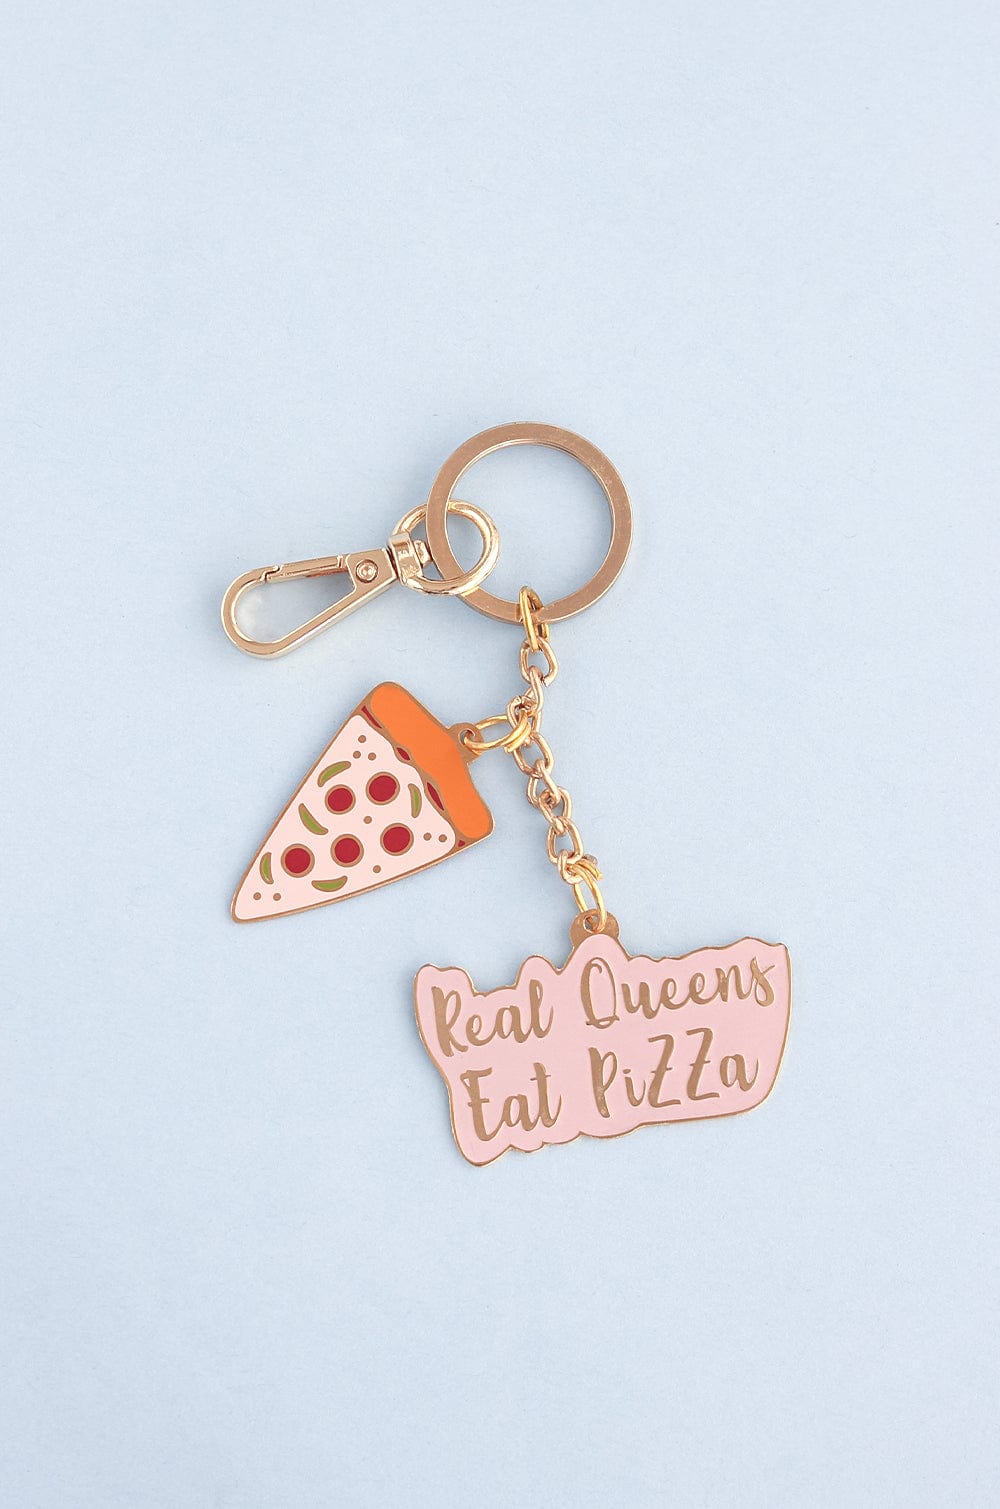 Real Queens Eat Pizza Keychain